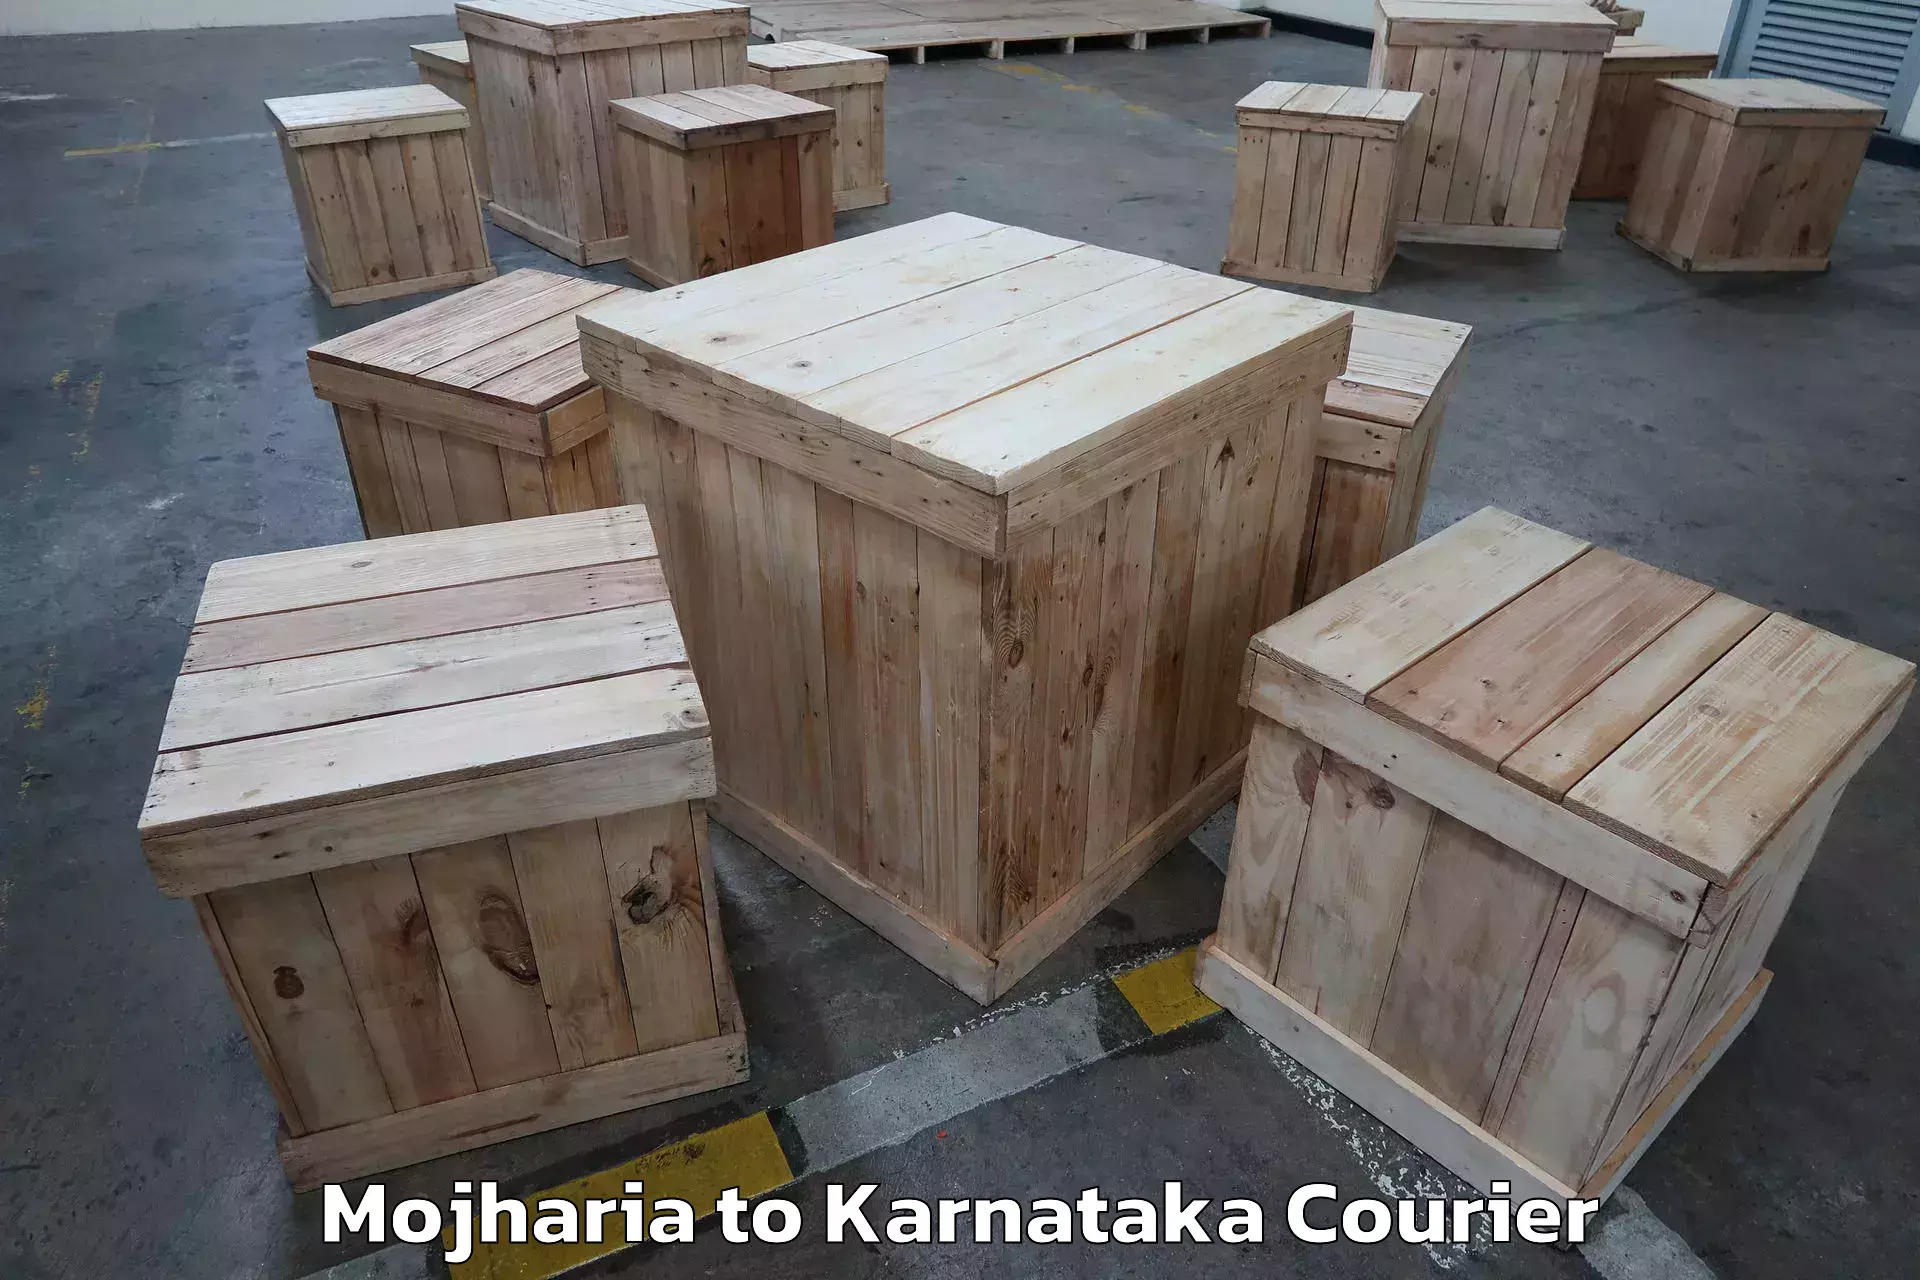 Trusted moving company Mojharia to Mangalore Port